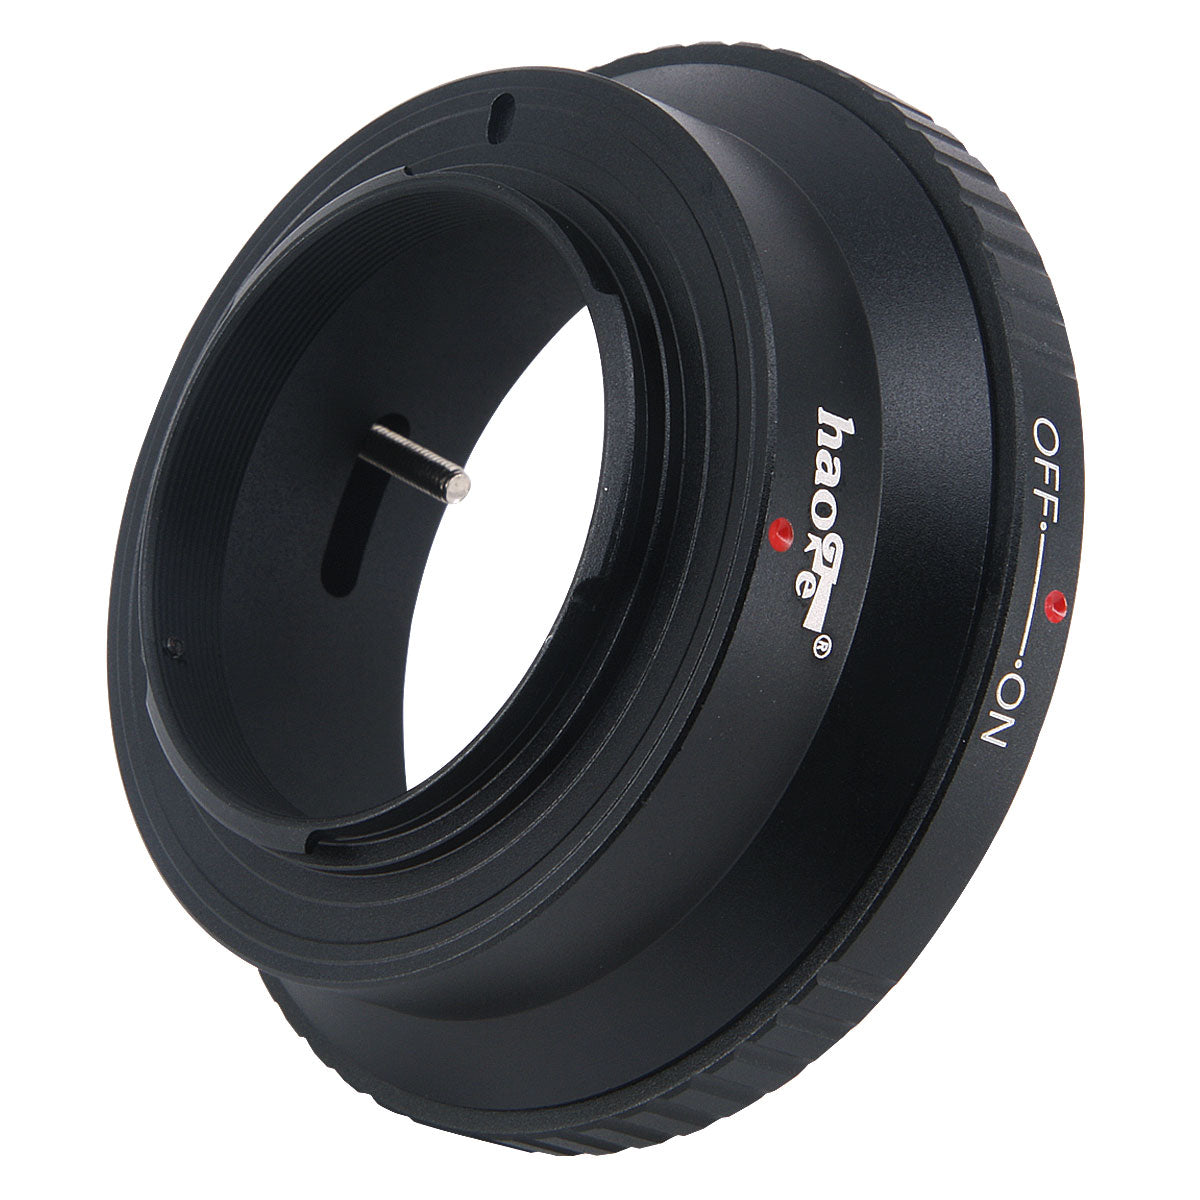 Haoge Manual Lens Mount Adapter for Canon FD mount Lens to Olympus and Panasonic Micro Four Thirds MFT M4/3 M43 Mount Camera